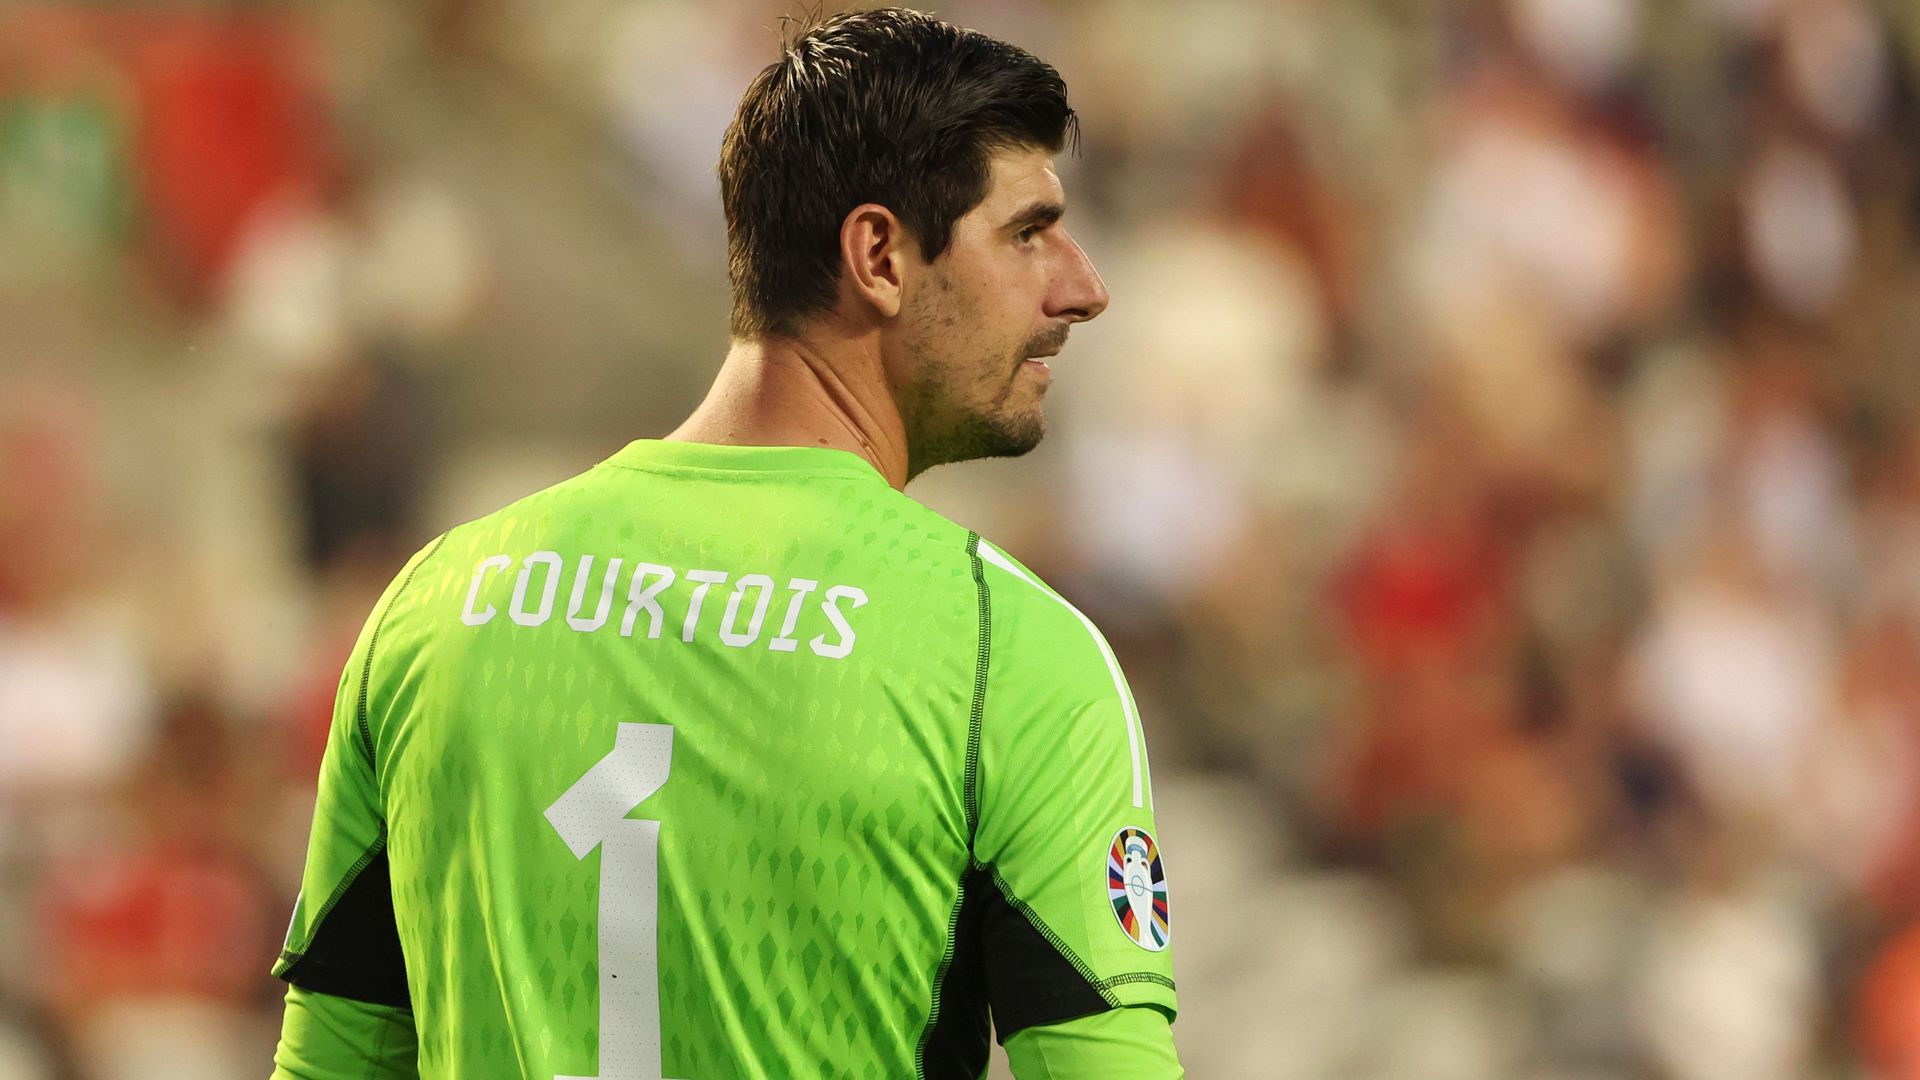 'His assessments don't fit with reality' - Courtois hits back at Tedesco claim